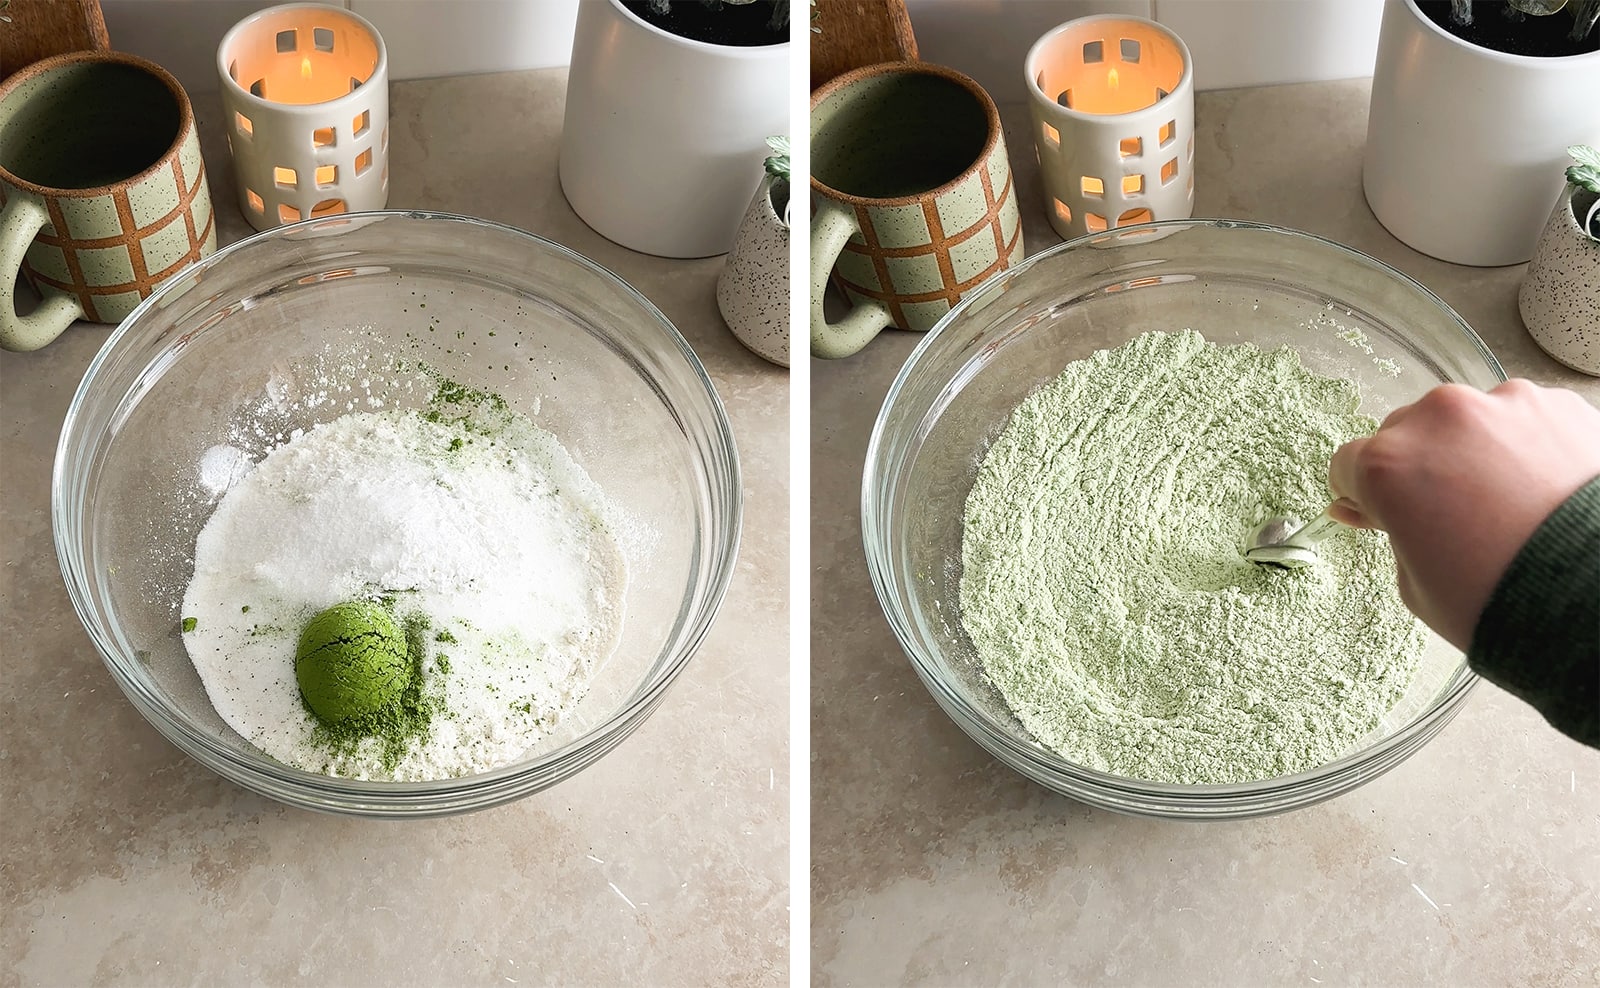 Left to right: dry ingredients in a mixing bowl, stirring flour mixture together in a bowl.